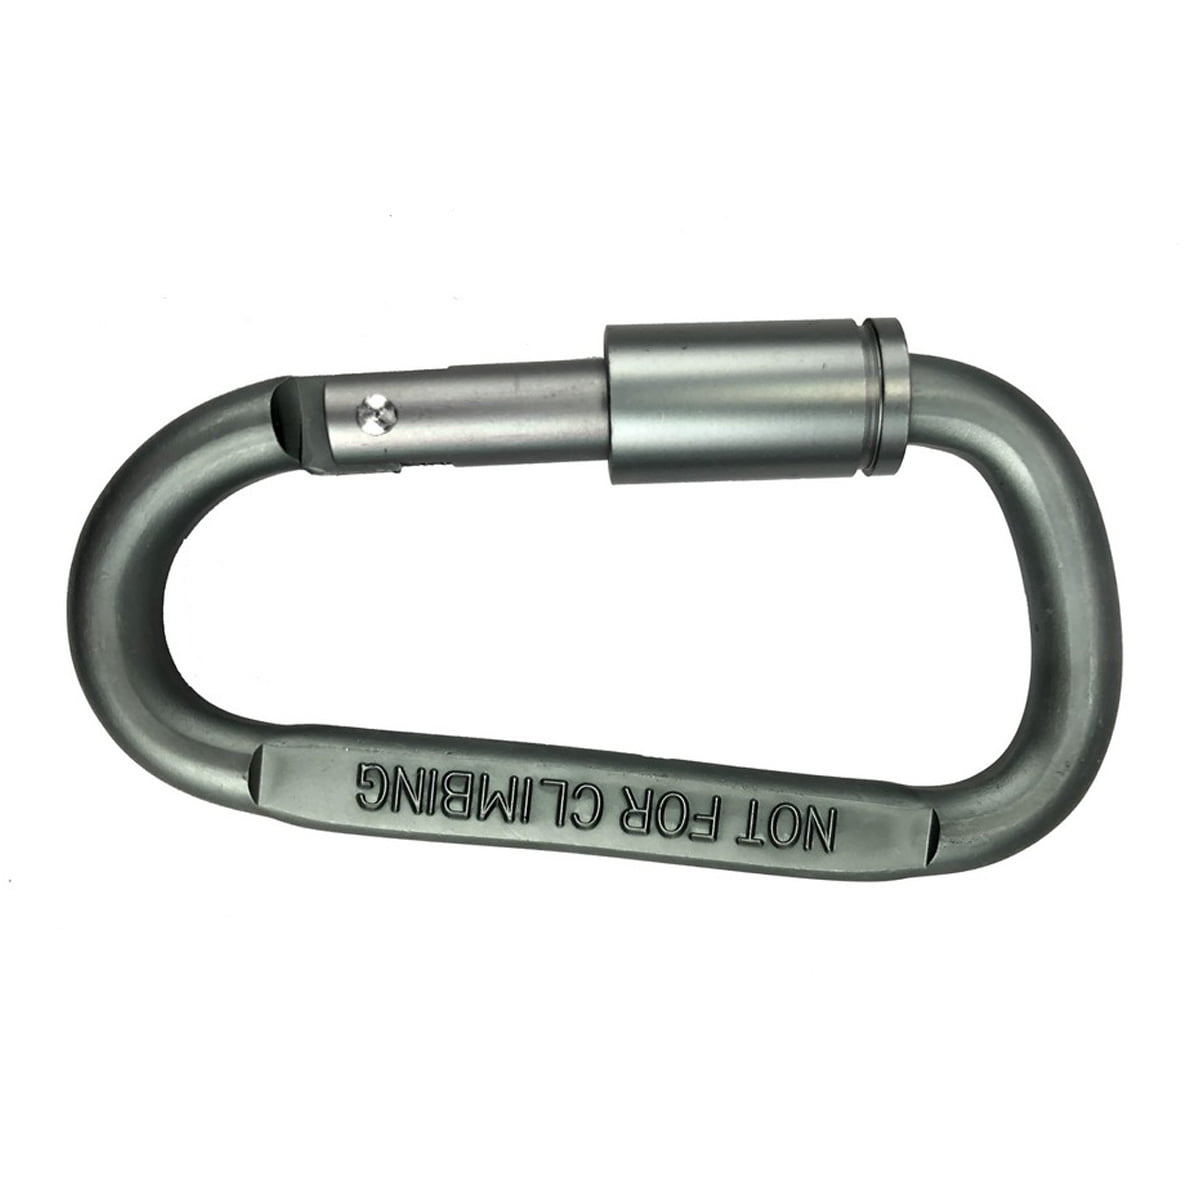 Details about   Aluminum Alloy Snap Clip Hook Keychain For Hiking Carabiner Heavy Duty Z4Y6 